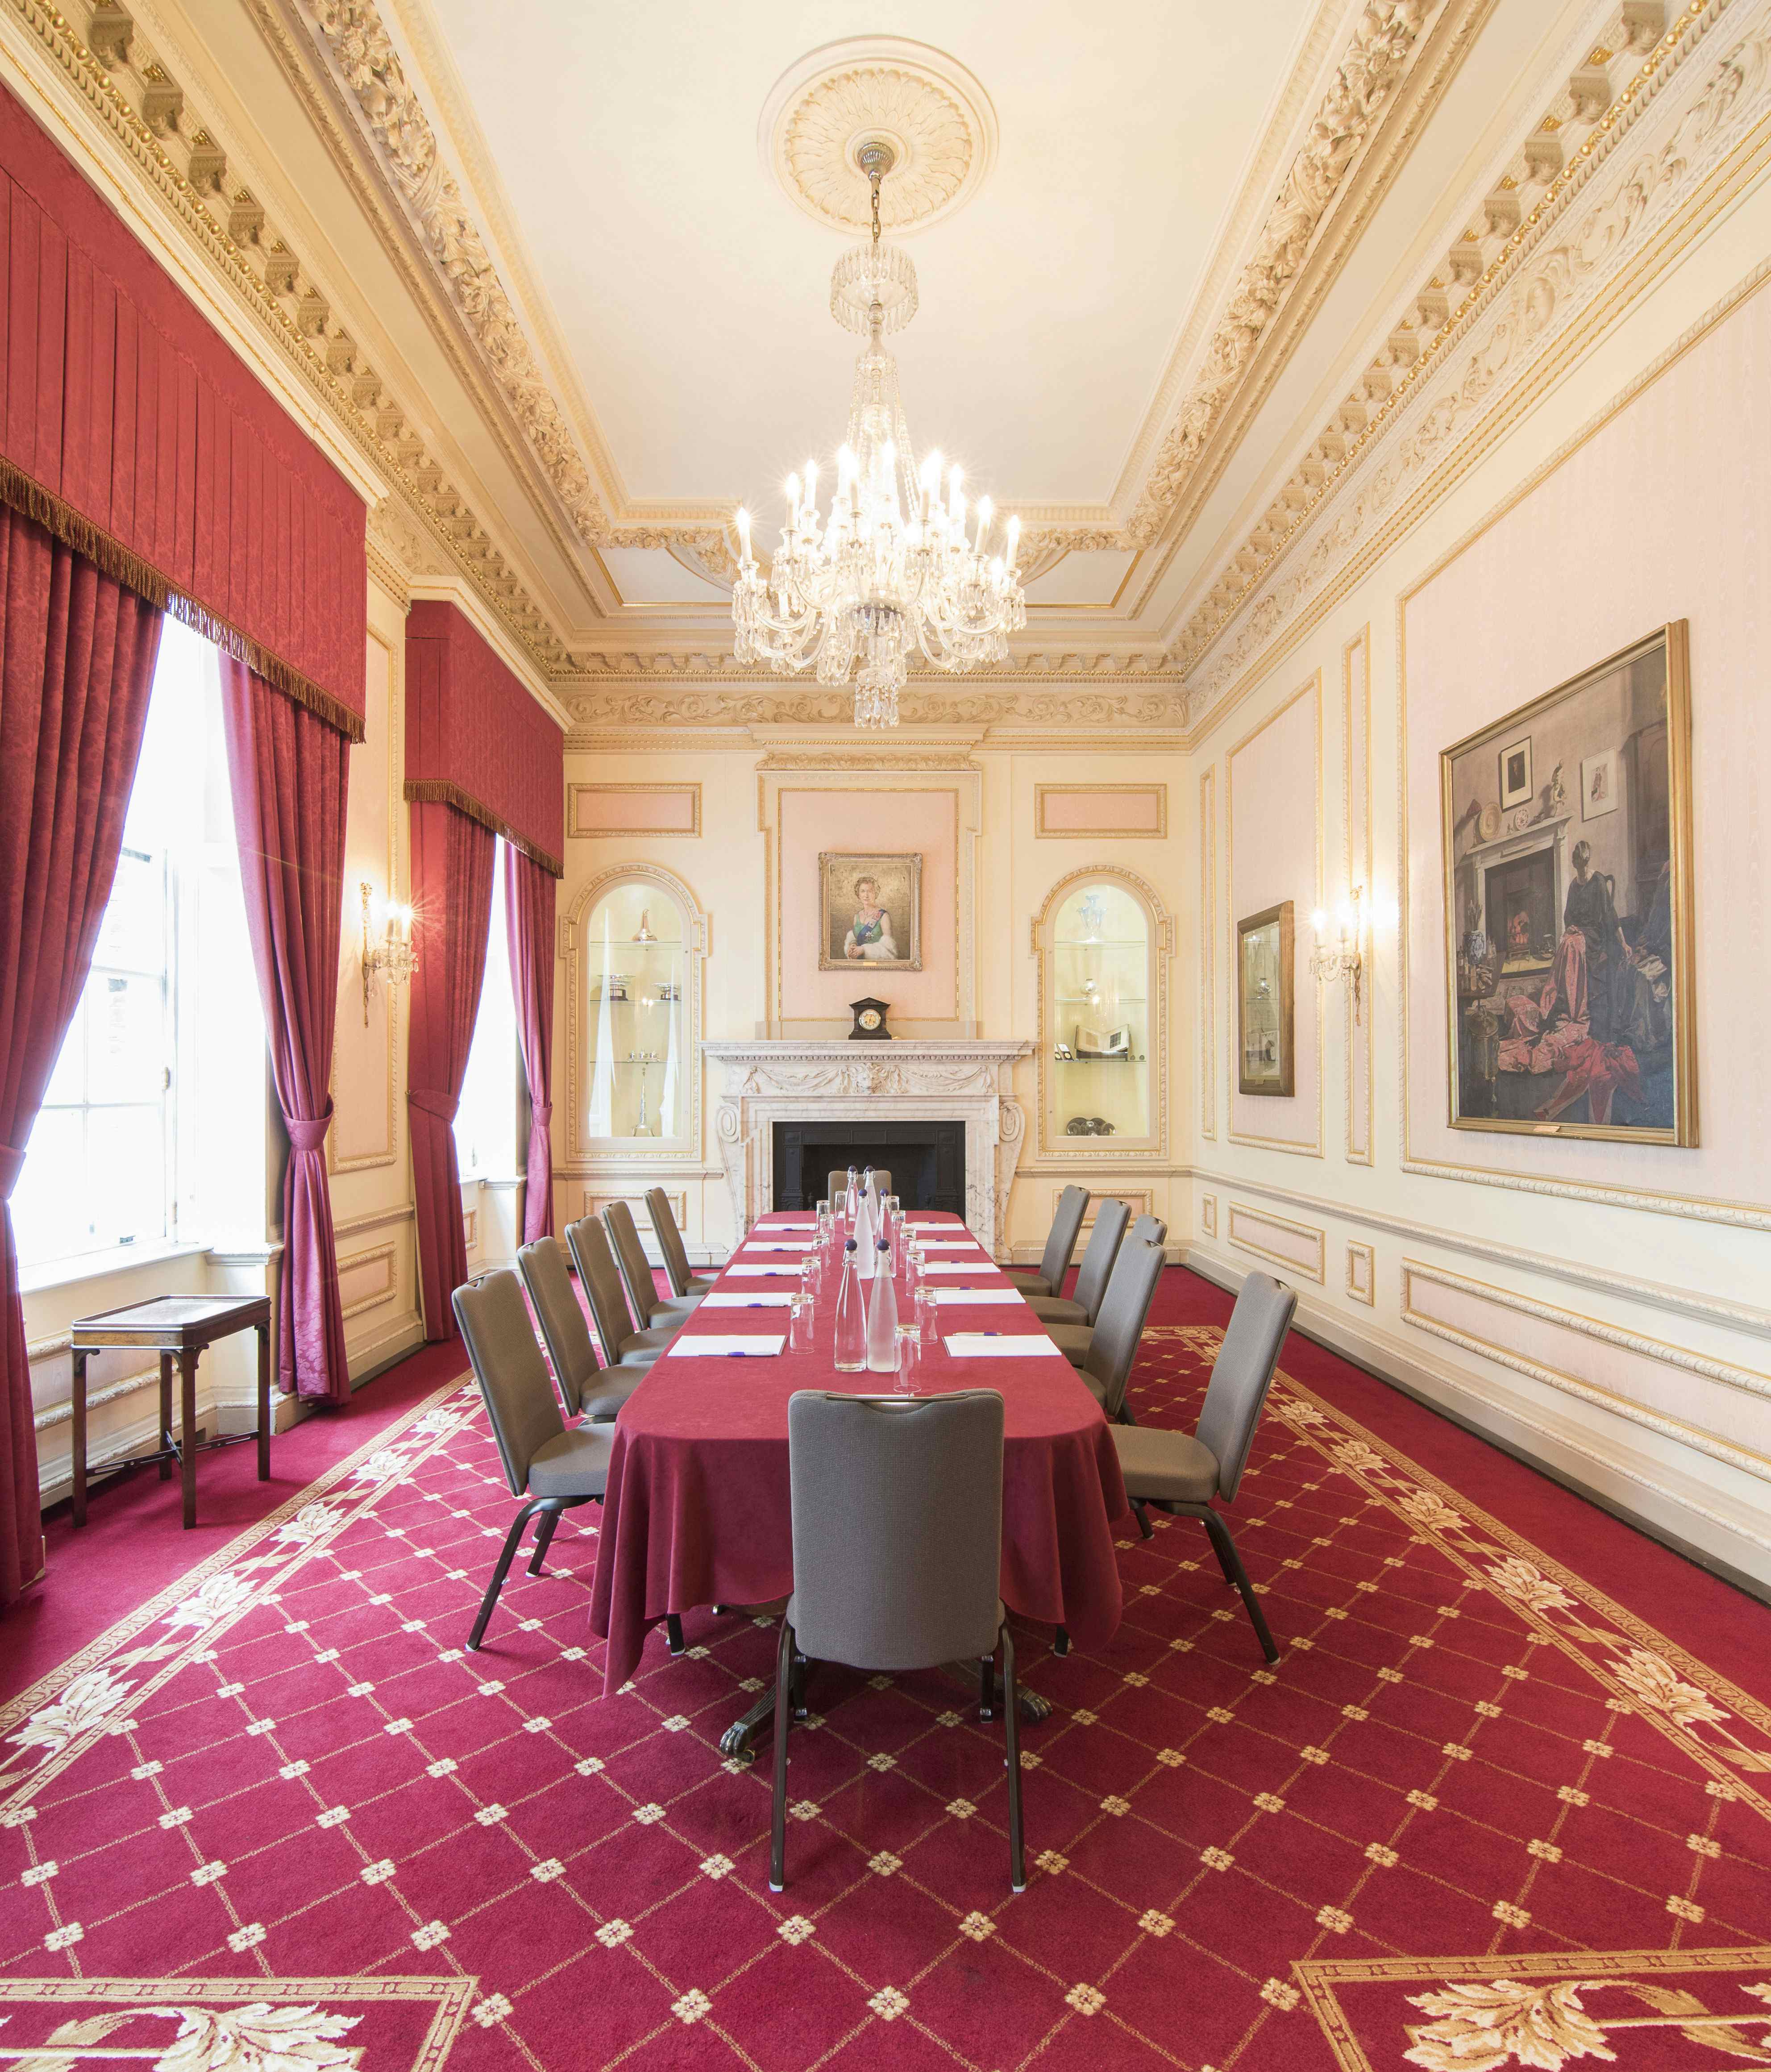 The Selkirk Room, The Caledonian Club